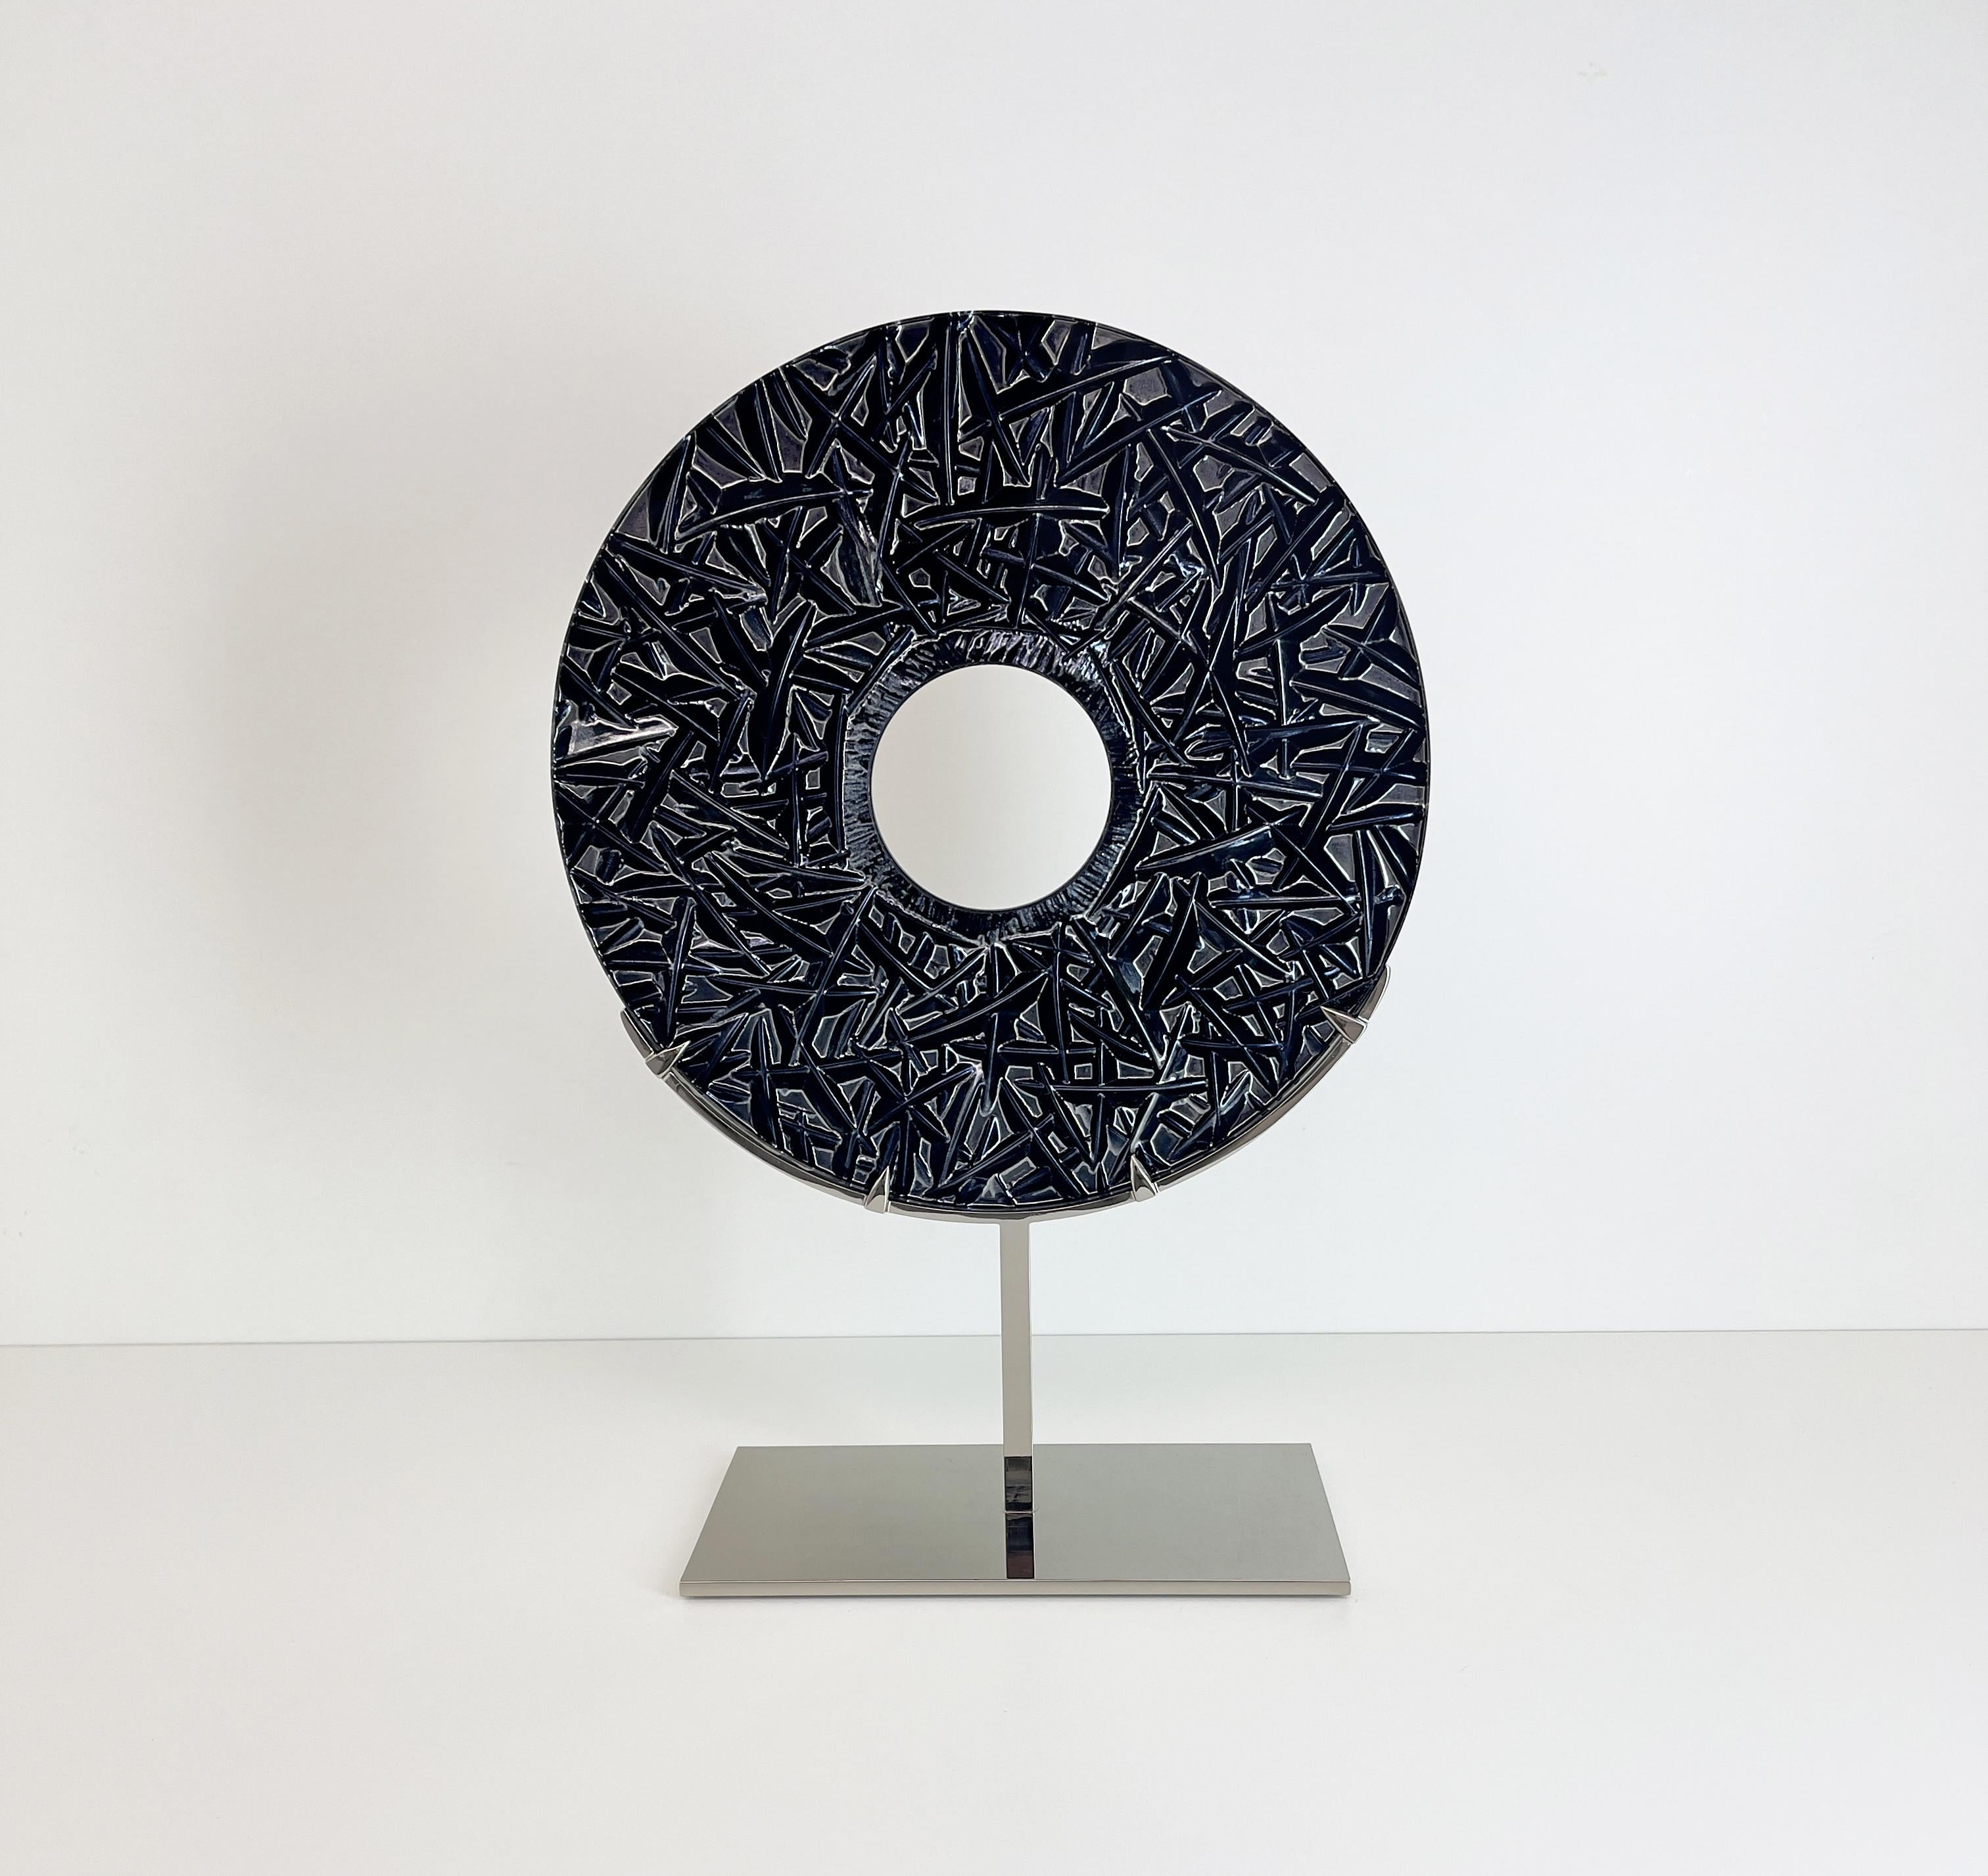 2023 Colletion of decorative objects by Ghirò Studio (Italy,Milan).
The 'Eye' is not only a luxury refined piece of furniture but it is also a hand carved sculpture designed to embellish with uniqueness, beauty and charming any living area or